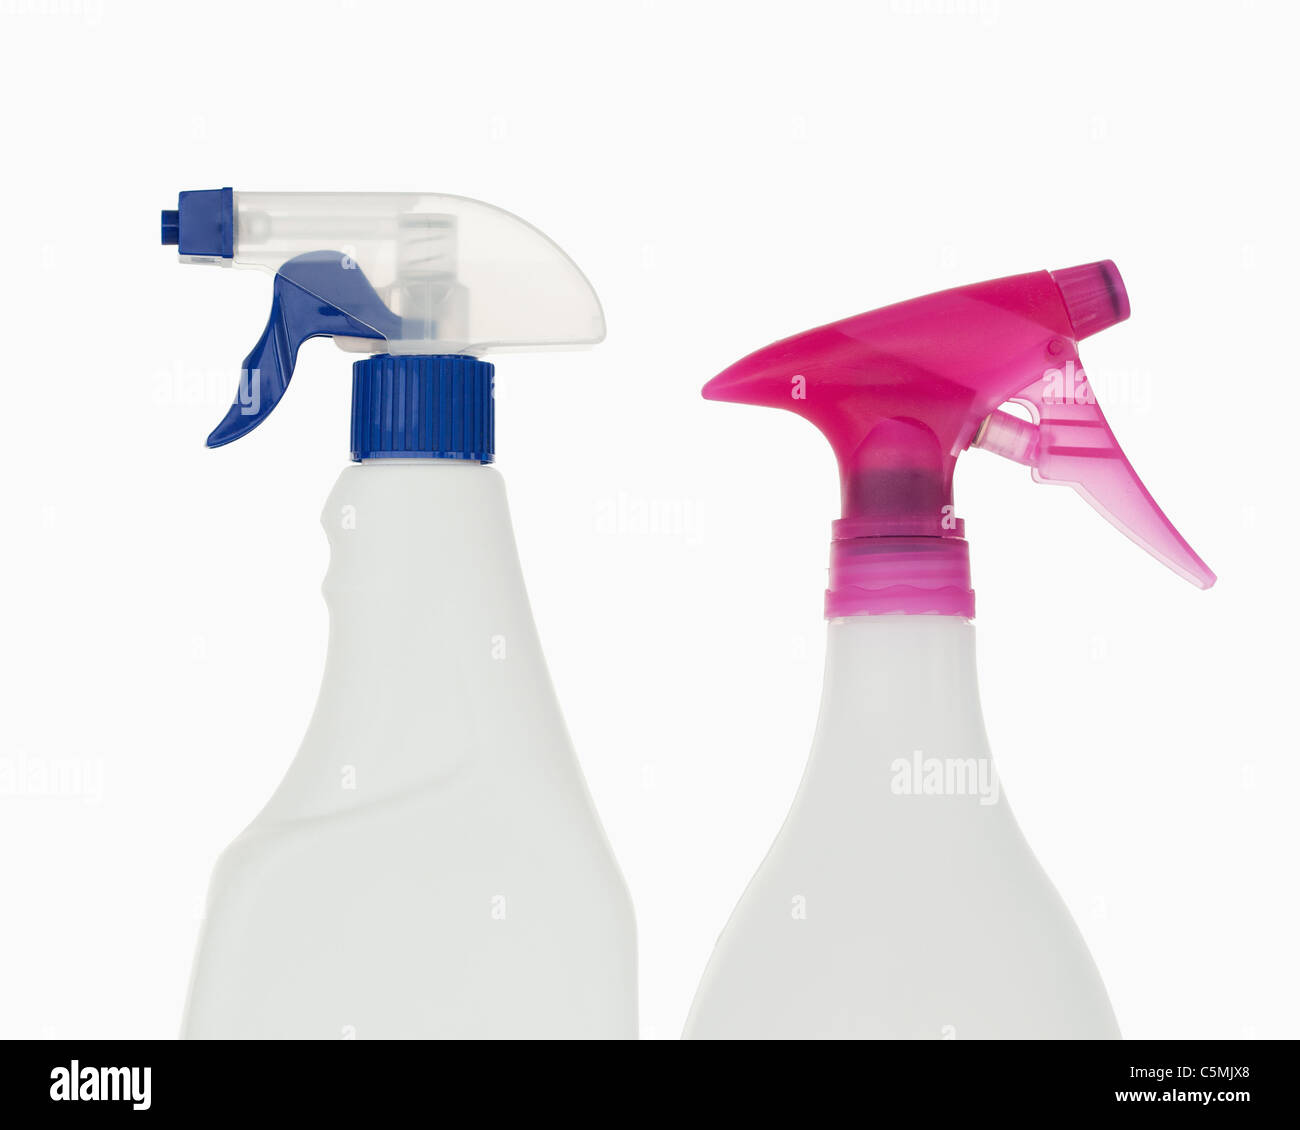 Close up of a pink and a blue spray bottles Stock Photo